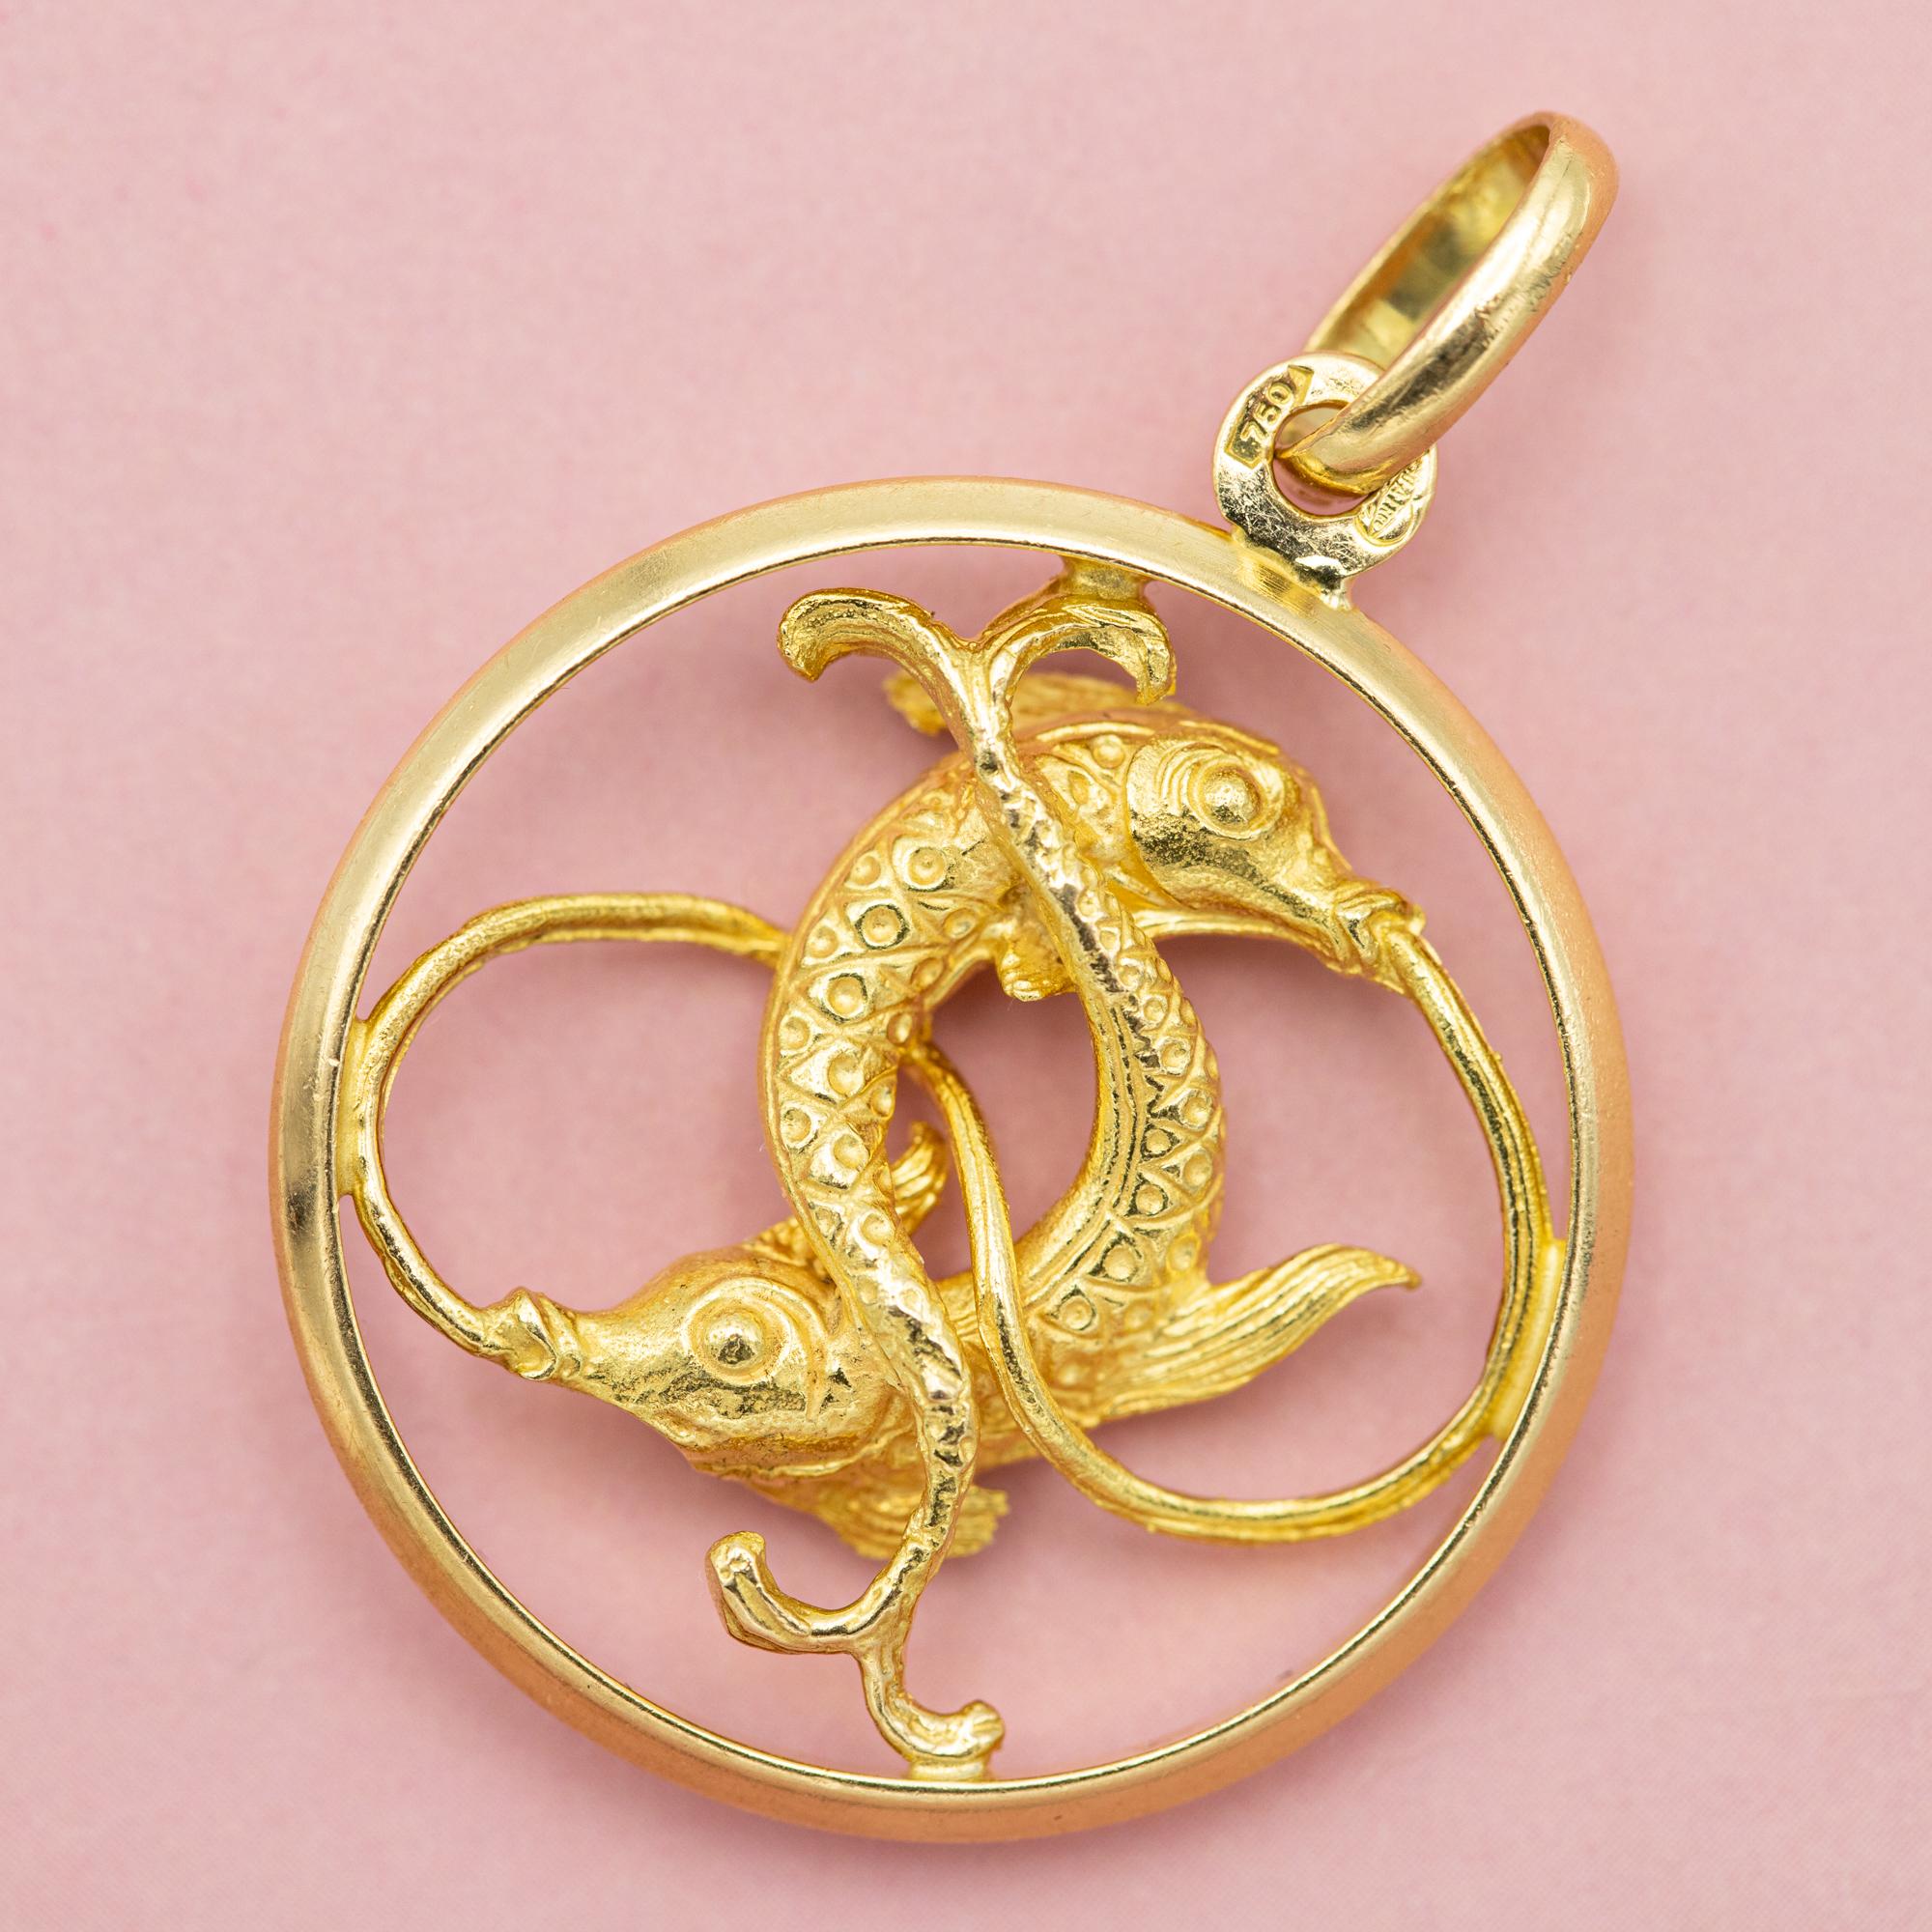 XL Large 18k zodiac charm pendant - Pisces medallion - solid yellow gold For Sale 1